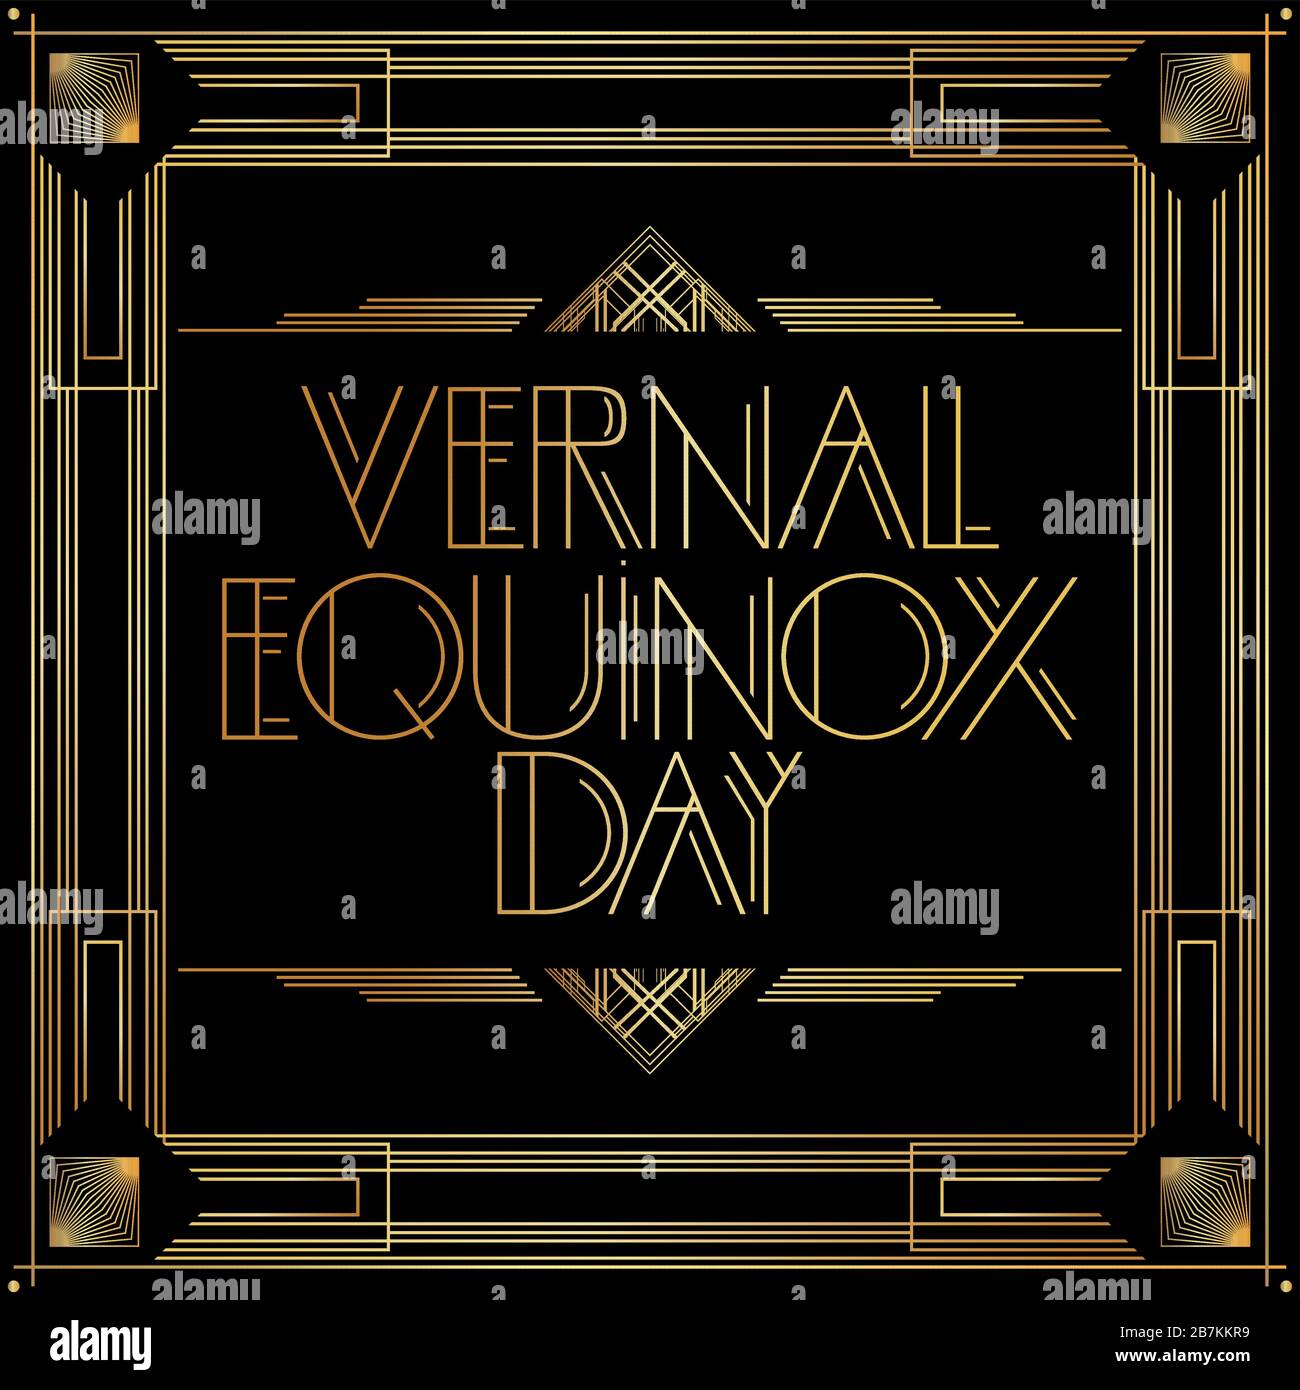 Art Deco Vernal Equinox Day poster, holiday in Japan on March 21st. Golden decorative greeting card, sign with vintage letters. Stock Vector